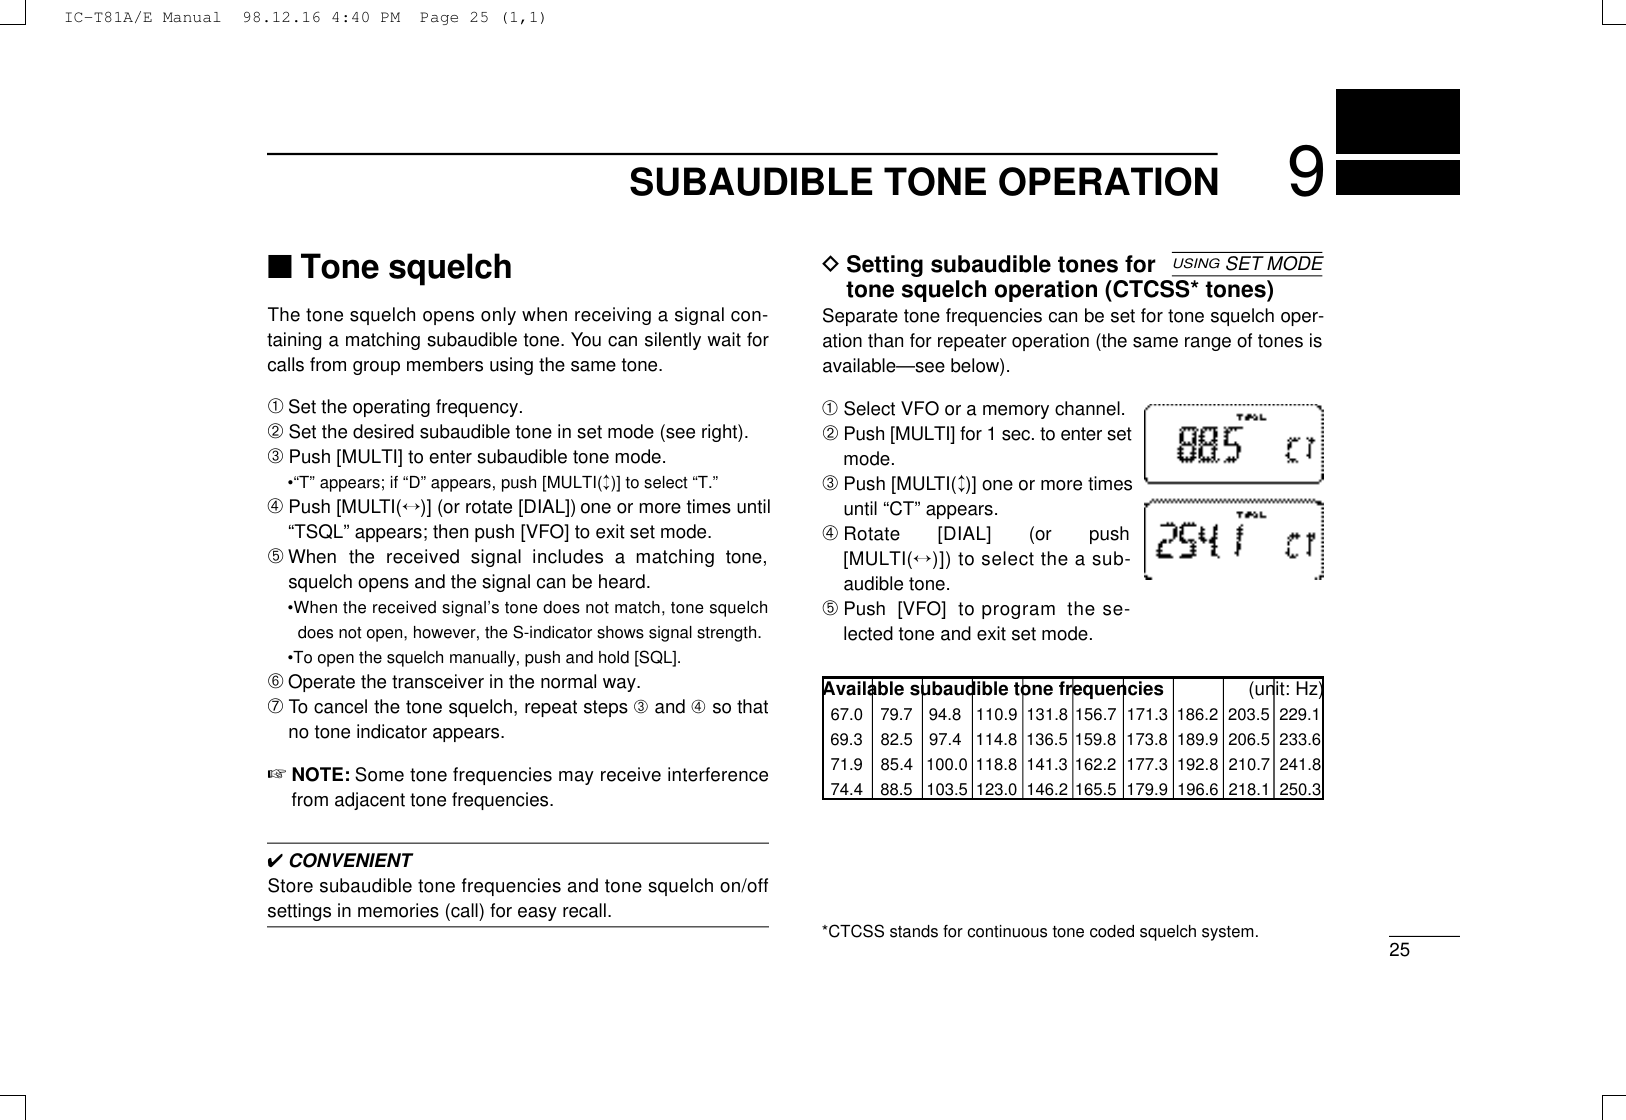 259SUBAUDIBLE TONE OPERATION■Tone squelchThe tone squelch opens only when receiving a signal con-taining a matching subaudible tone. You can silently wait forcalls from group members using the same tone.➀Set the operating frequency.➁Set the desired subaudible tone in set mode (see right).➂Push [MULTI] to enter subaudible tone mode.•“T” appears; if “D” appears, push [MULTI(↕)] to select “T.”➃Push [MULT I (↔)] (or rotate [DIAL]) one or more times until“TSQL” appears; then push [VFO] to exit set mode.➄When  the  received  signal  includes  a  matching  tone,squelch opens and the signal can be heard.•When the received signal’s tone does not match, tone squelchdoes not open, however, the S-indicator shows signal strength.•To open the squelch manually, push and hold [SQL].➅Operate the transceiver in the normal way.➆To cancel the tone squelch, repeat steps ➂and ➃so thatno tone indicator appears.☞N O T E : Some tone frequencies may receive interferencefrom adjacent tone frequencies.✔CONVENIENTStore subaudible tone frequencies and tone squelch on/offsettings in memories (call) for easy recall.DSetting subaudible tones fortone squelch operation (CTCSS* tones)Separate tone frequencies can be set for tone squelch oper-ation than for repeater operation (the same range of tones isavailable—see below).➀Select VFO or a memory channel.➁Push [MULTI] for 1 sec. to enter setmode.➂Push [MULT I (↕)] one or more timesuntil “CT” appears.➃Rotate  [DIAL]  (or  push[ M U LT I (↔)]) to select the a sub-audible tone.➄Push  [VFO]  to program  the se-lected tone and exit set mode.Available subaudible tone frequencies (unit: Hz)67.0 79.7 94.8 110.9 131.8 156.7 171.3 186.2 203.5 229.169.3 82.5 97.4 114.8 136.5 159.8 173.8 189.9 206.5 233.671.9 85.4 100.0 118.8 141.3 162.2 177.3 192.8 210.7 241.874.4 88.5 103.5 123.0 146.2 165.5 179.9 196.6 218.1 250.3USINGSET MODE*CTCSS stands for continuous tone coded squelch system.IC-T81A/E Manual  98.12.16 4:40 PM  Page 25 (1,1)